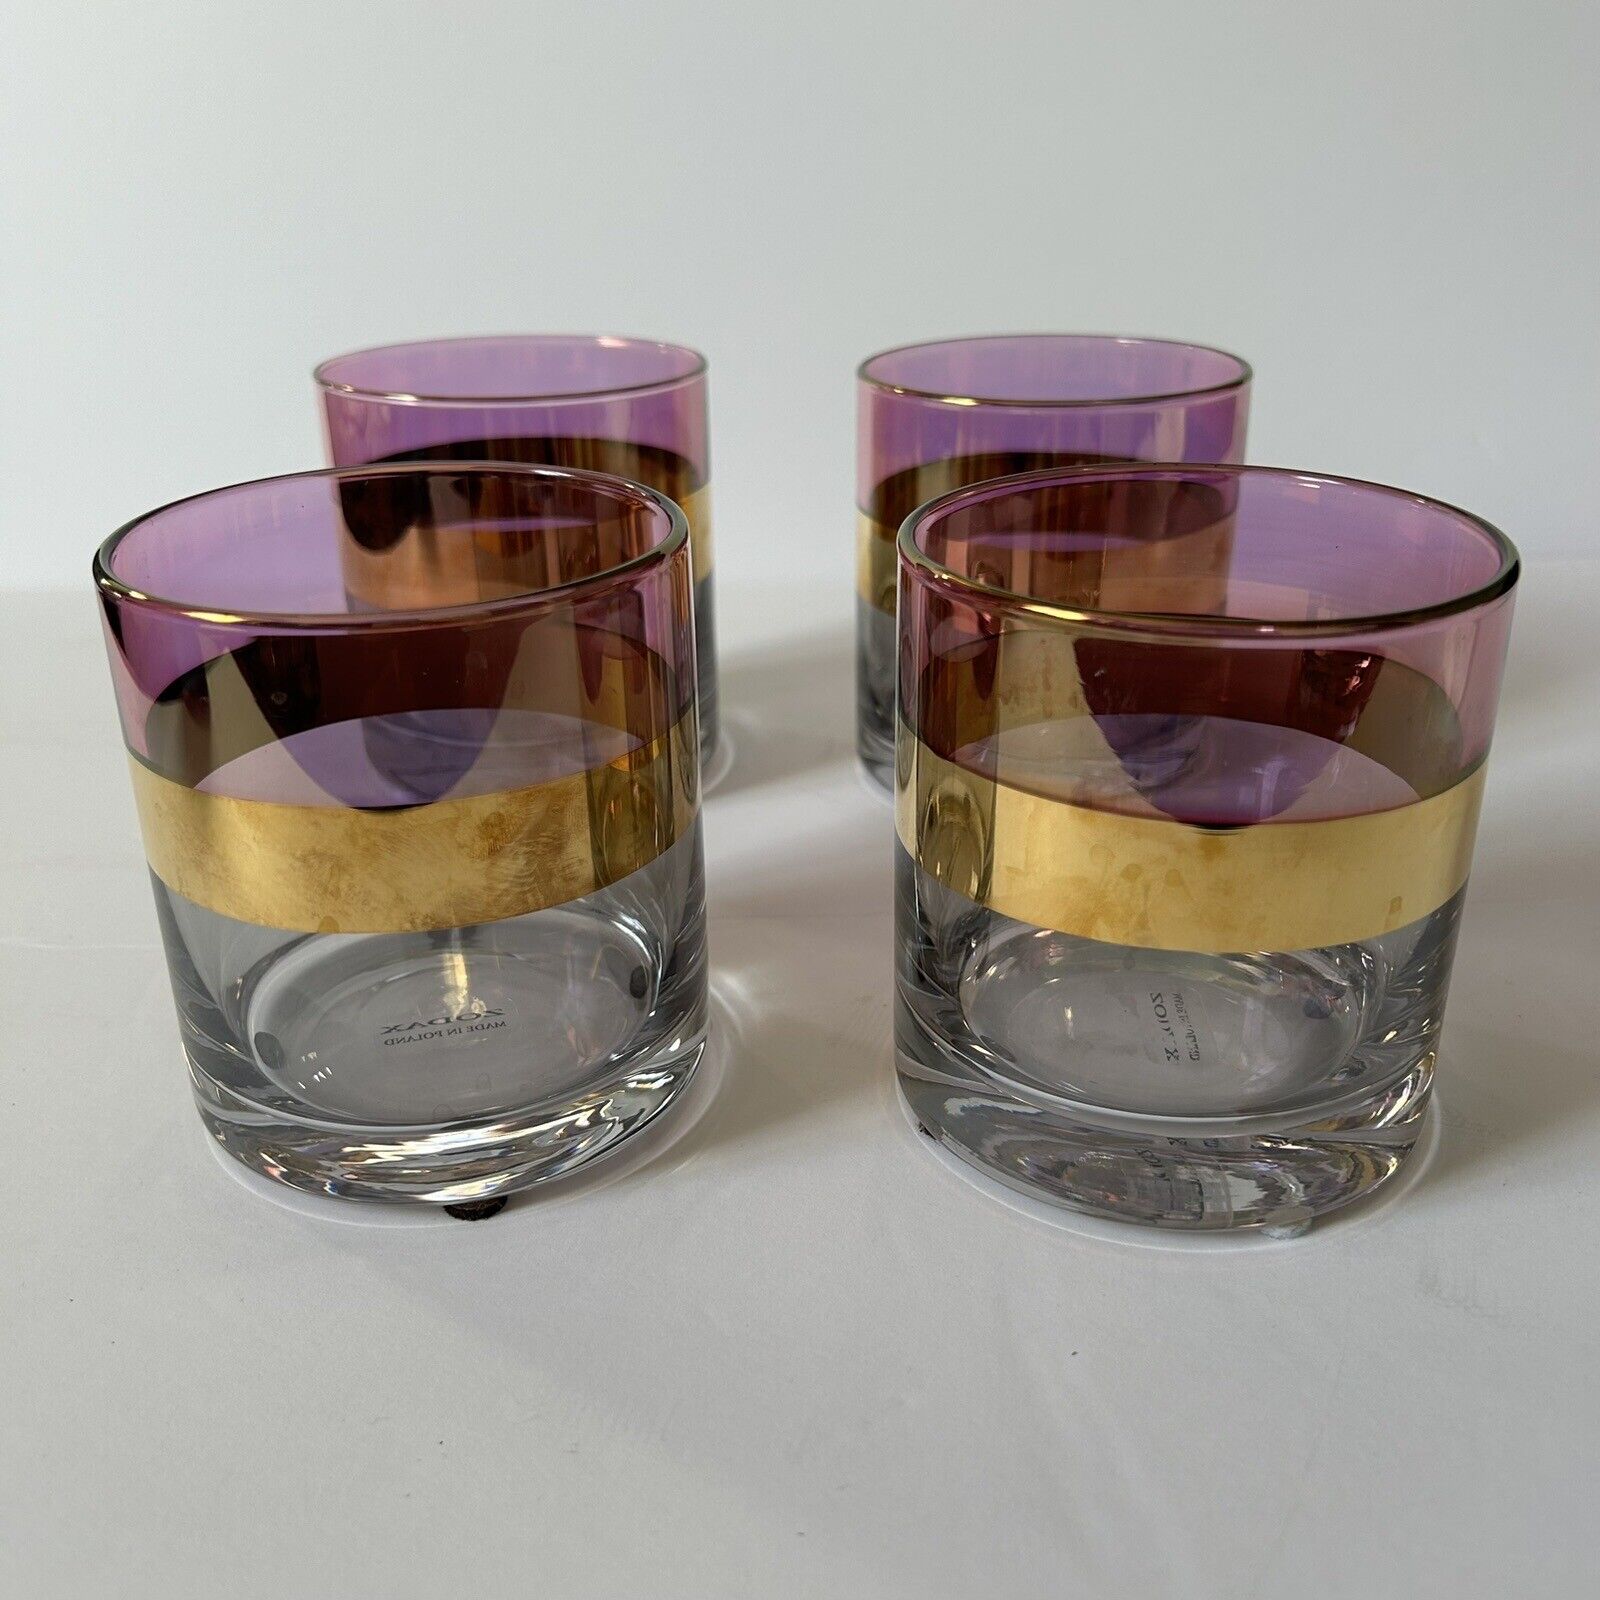 Set of 4 Zodax Cylinder Glass Vases Purple & Gold Made in Poland 4”